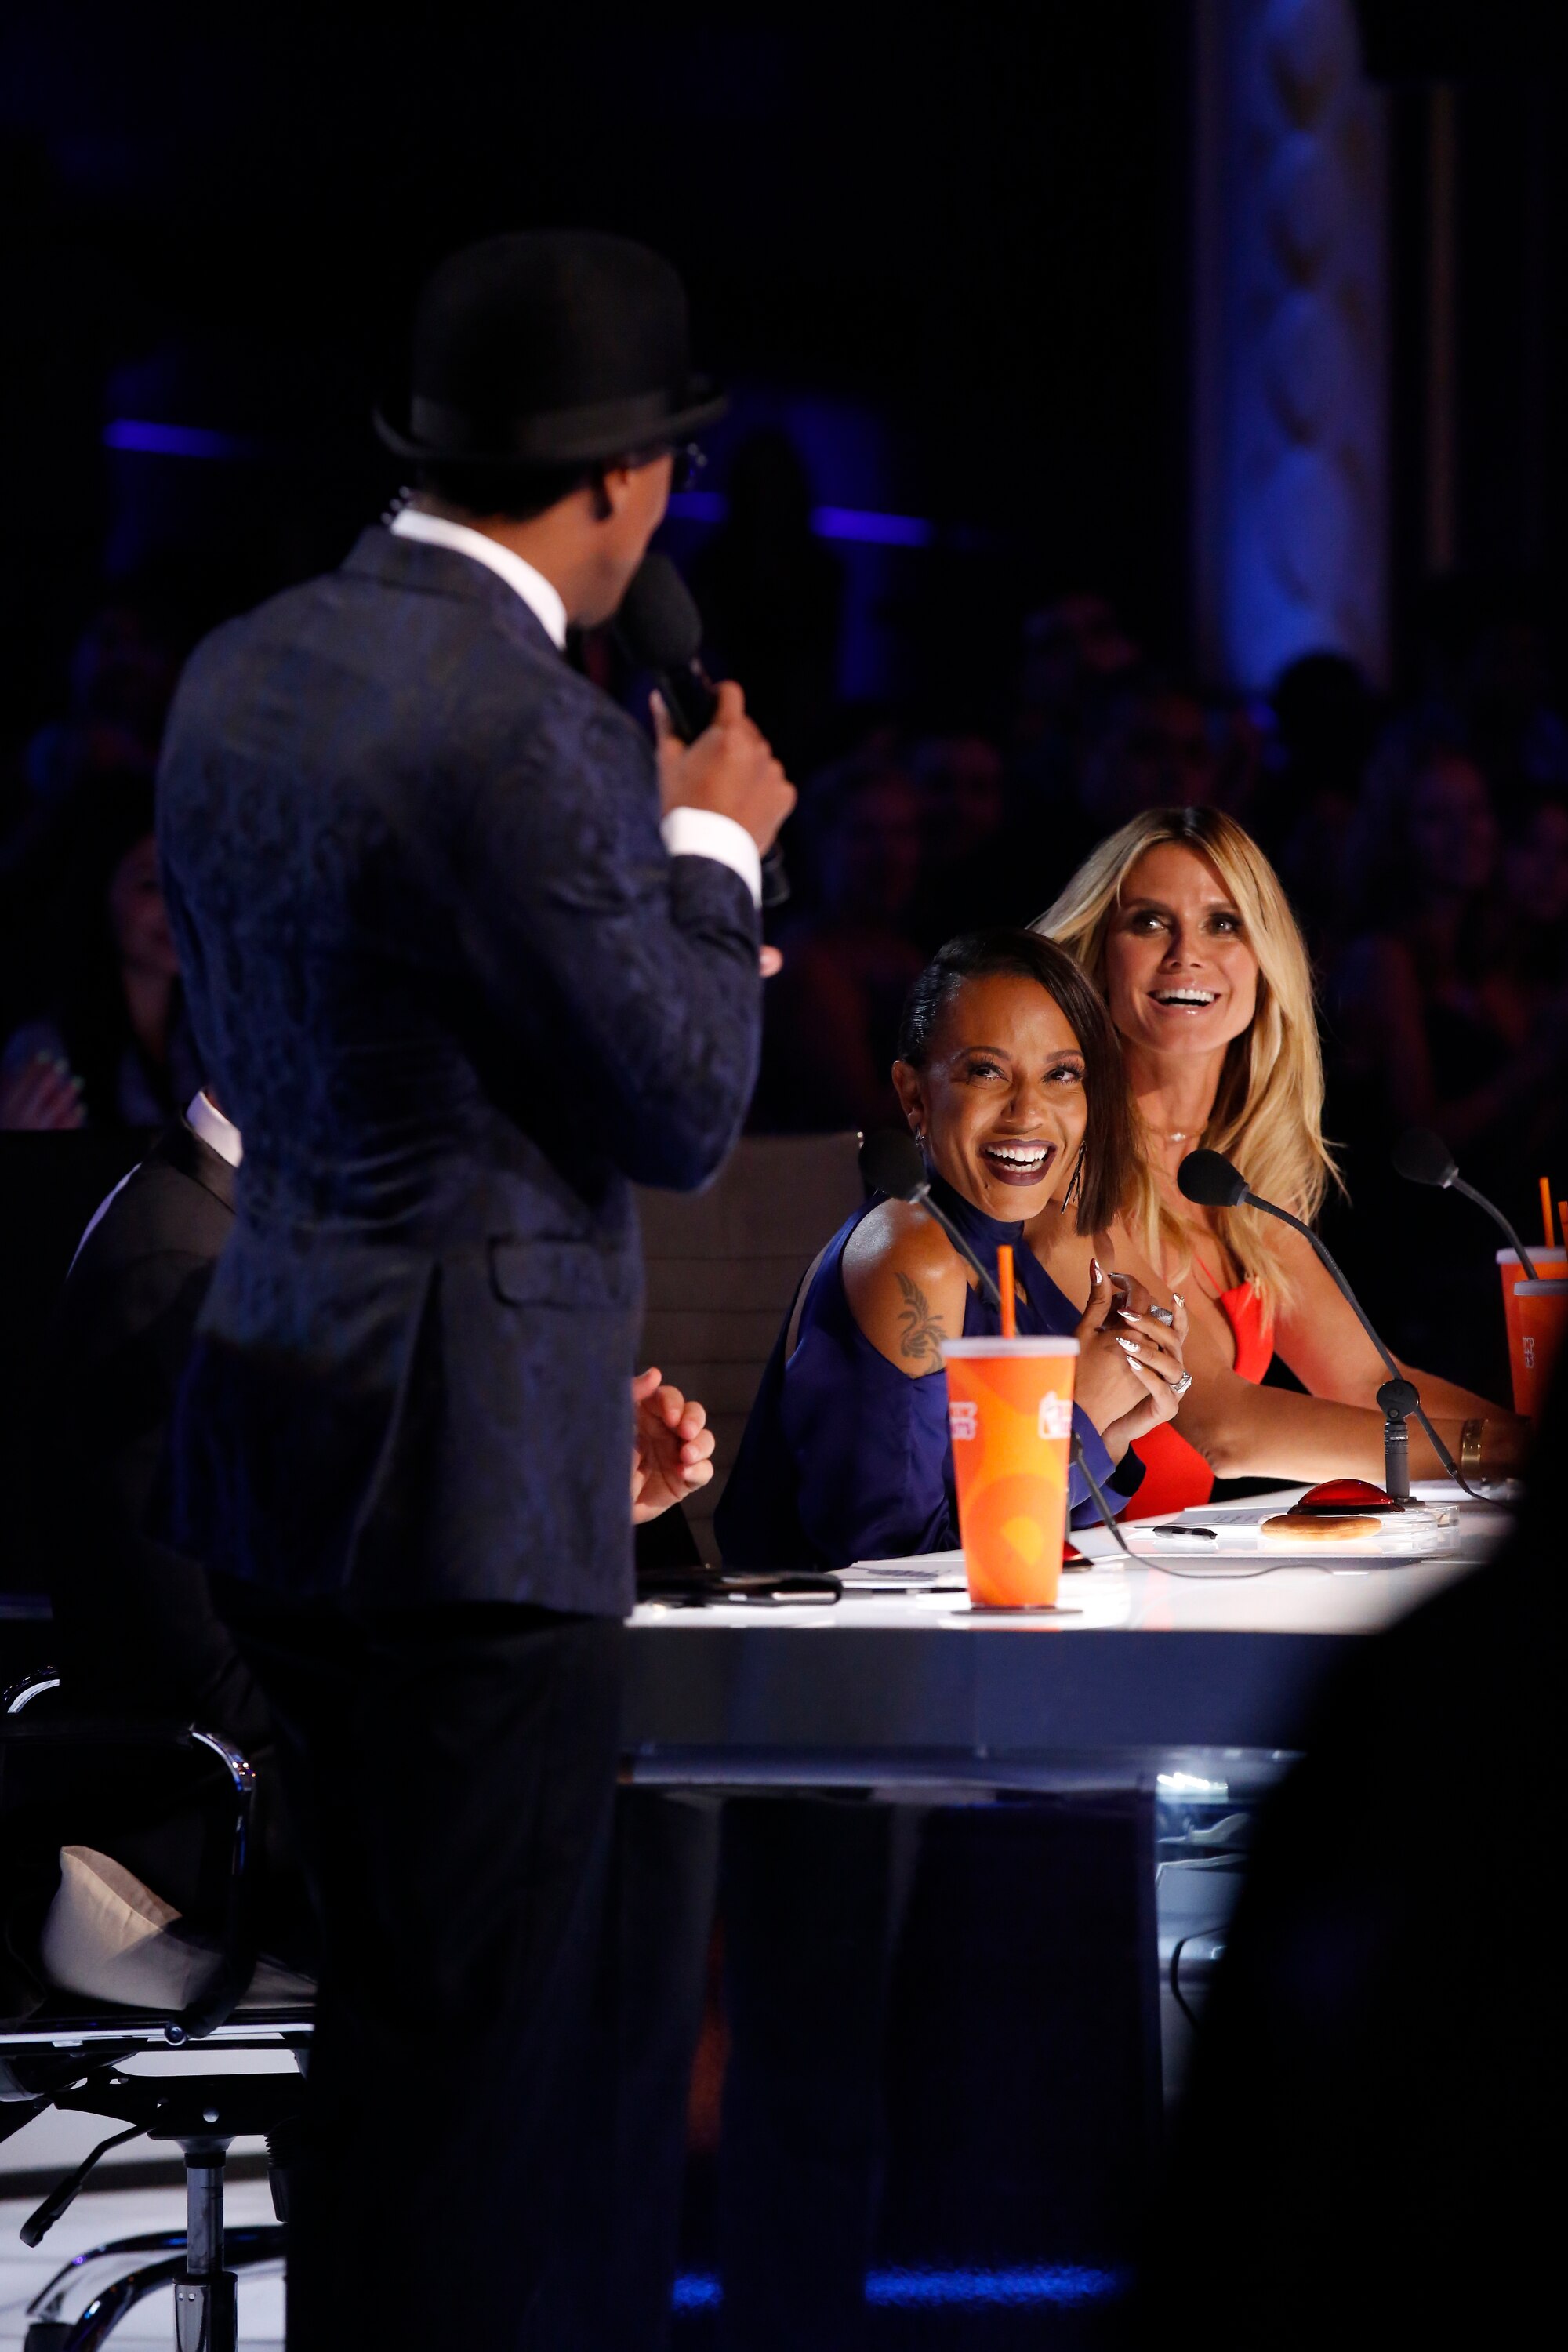 Americas Got Talent: Semifinals Results 2 Photo: 2915343 